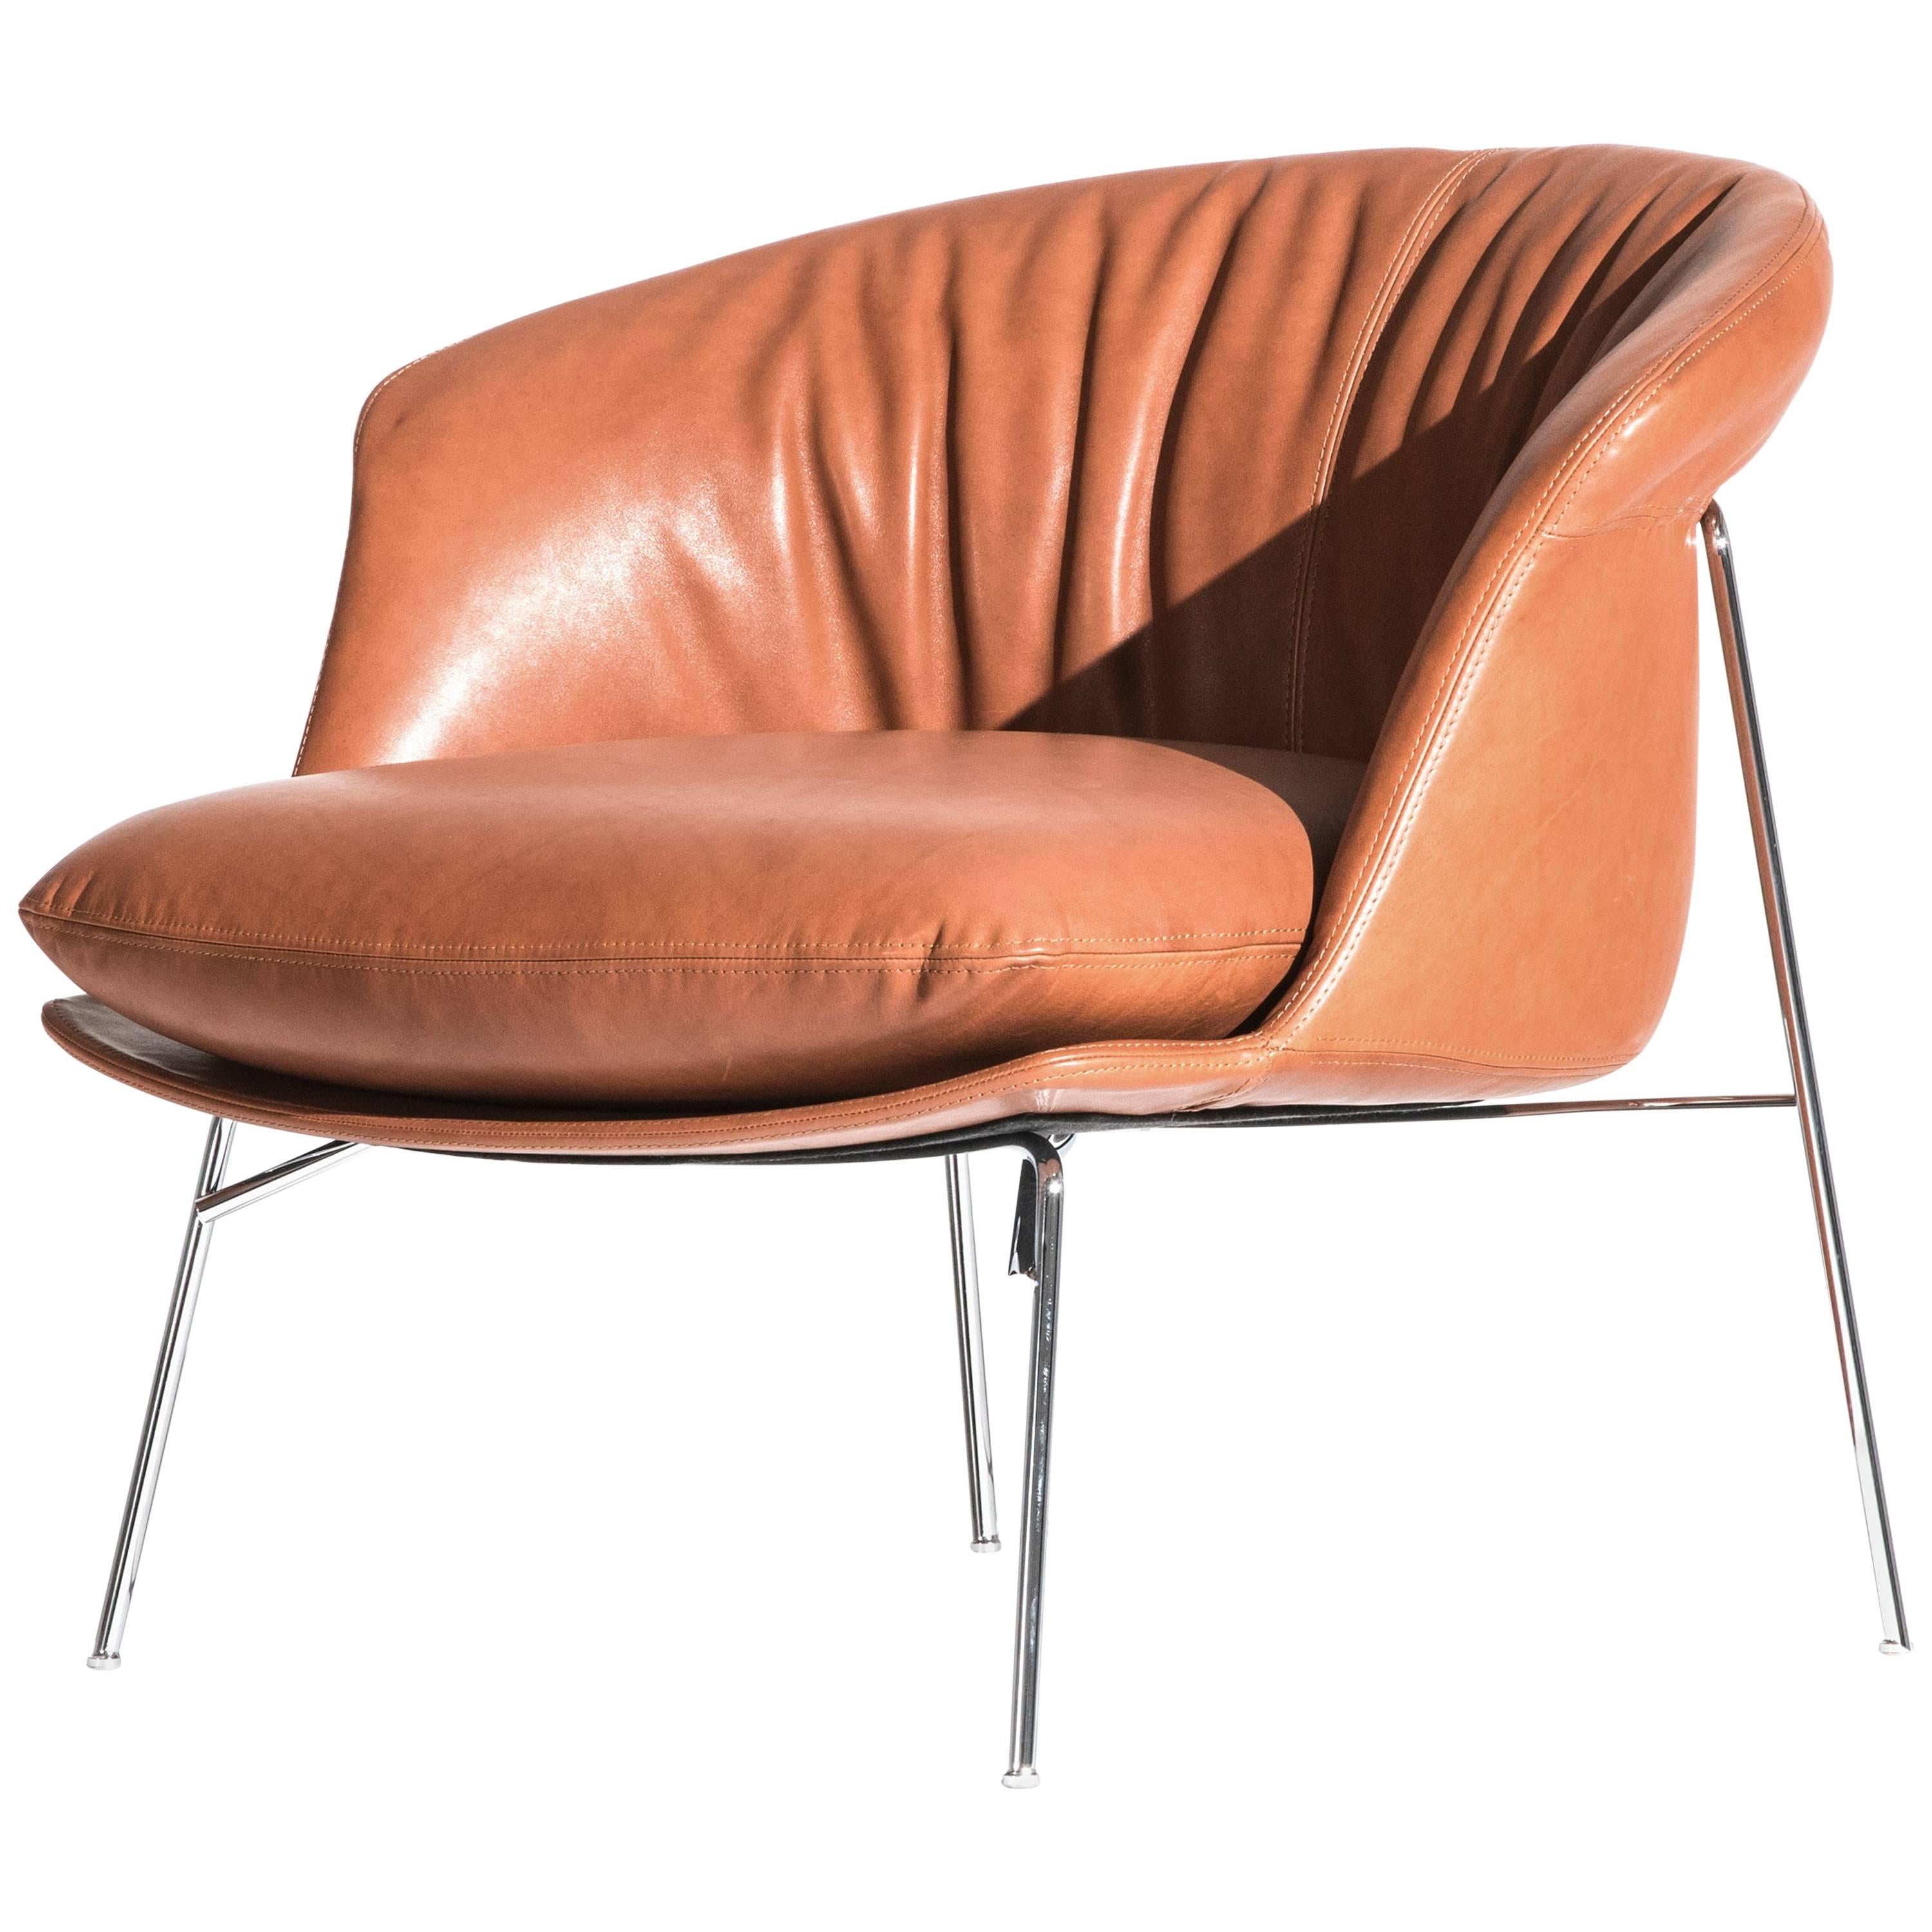 Moon Armchair in Brown Leather Cushion by Ludovica & Roberto Palomba for Driade For Sale